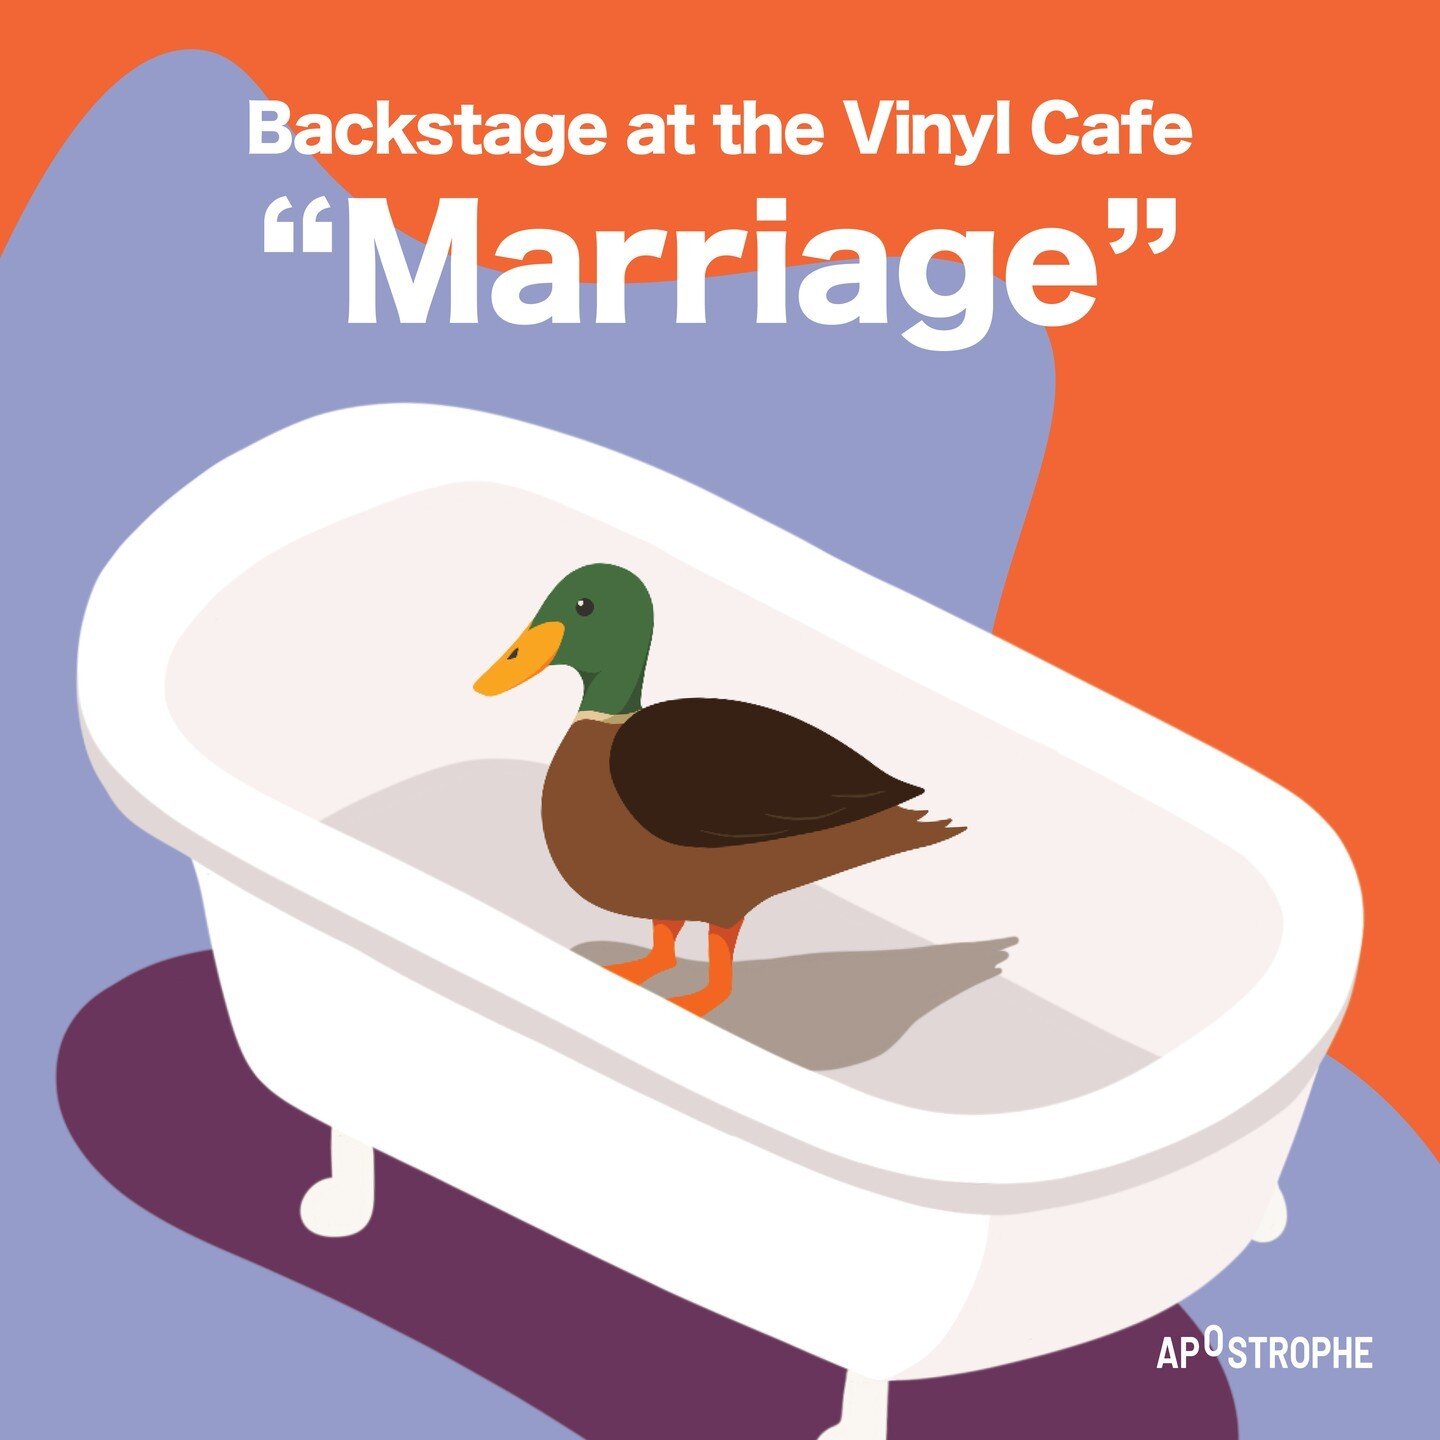 &quot;There is nothing like a wedding to addle people&rsquo;s minds.&quot;

Today on the pod we have two hilarious stories about marriage and proposal. In the first, Dave loses his wedding ring and fears it may have been swallowed by a duck. In the s